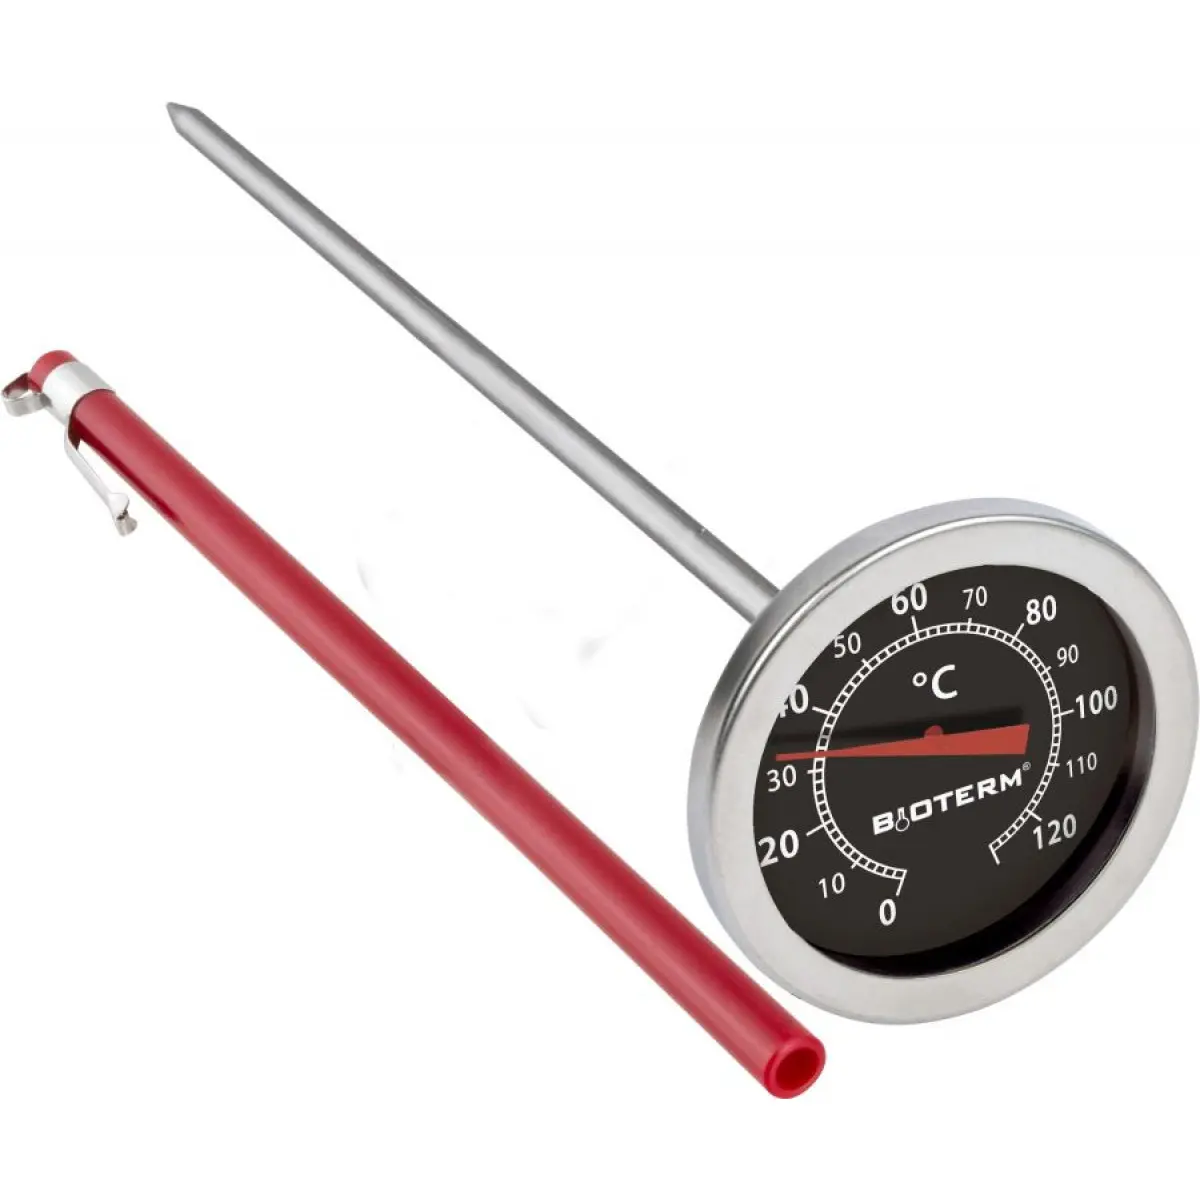 smokehouse thermometer - How do you use a smoker thermometer